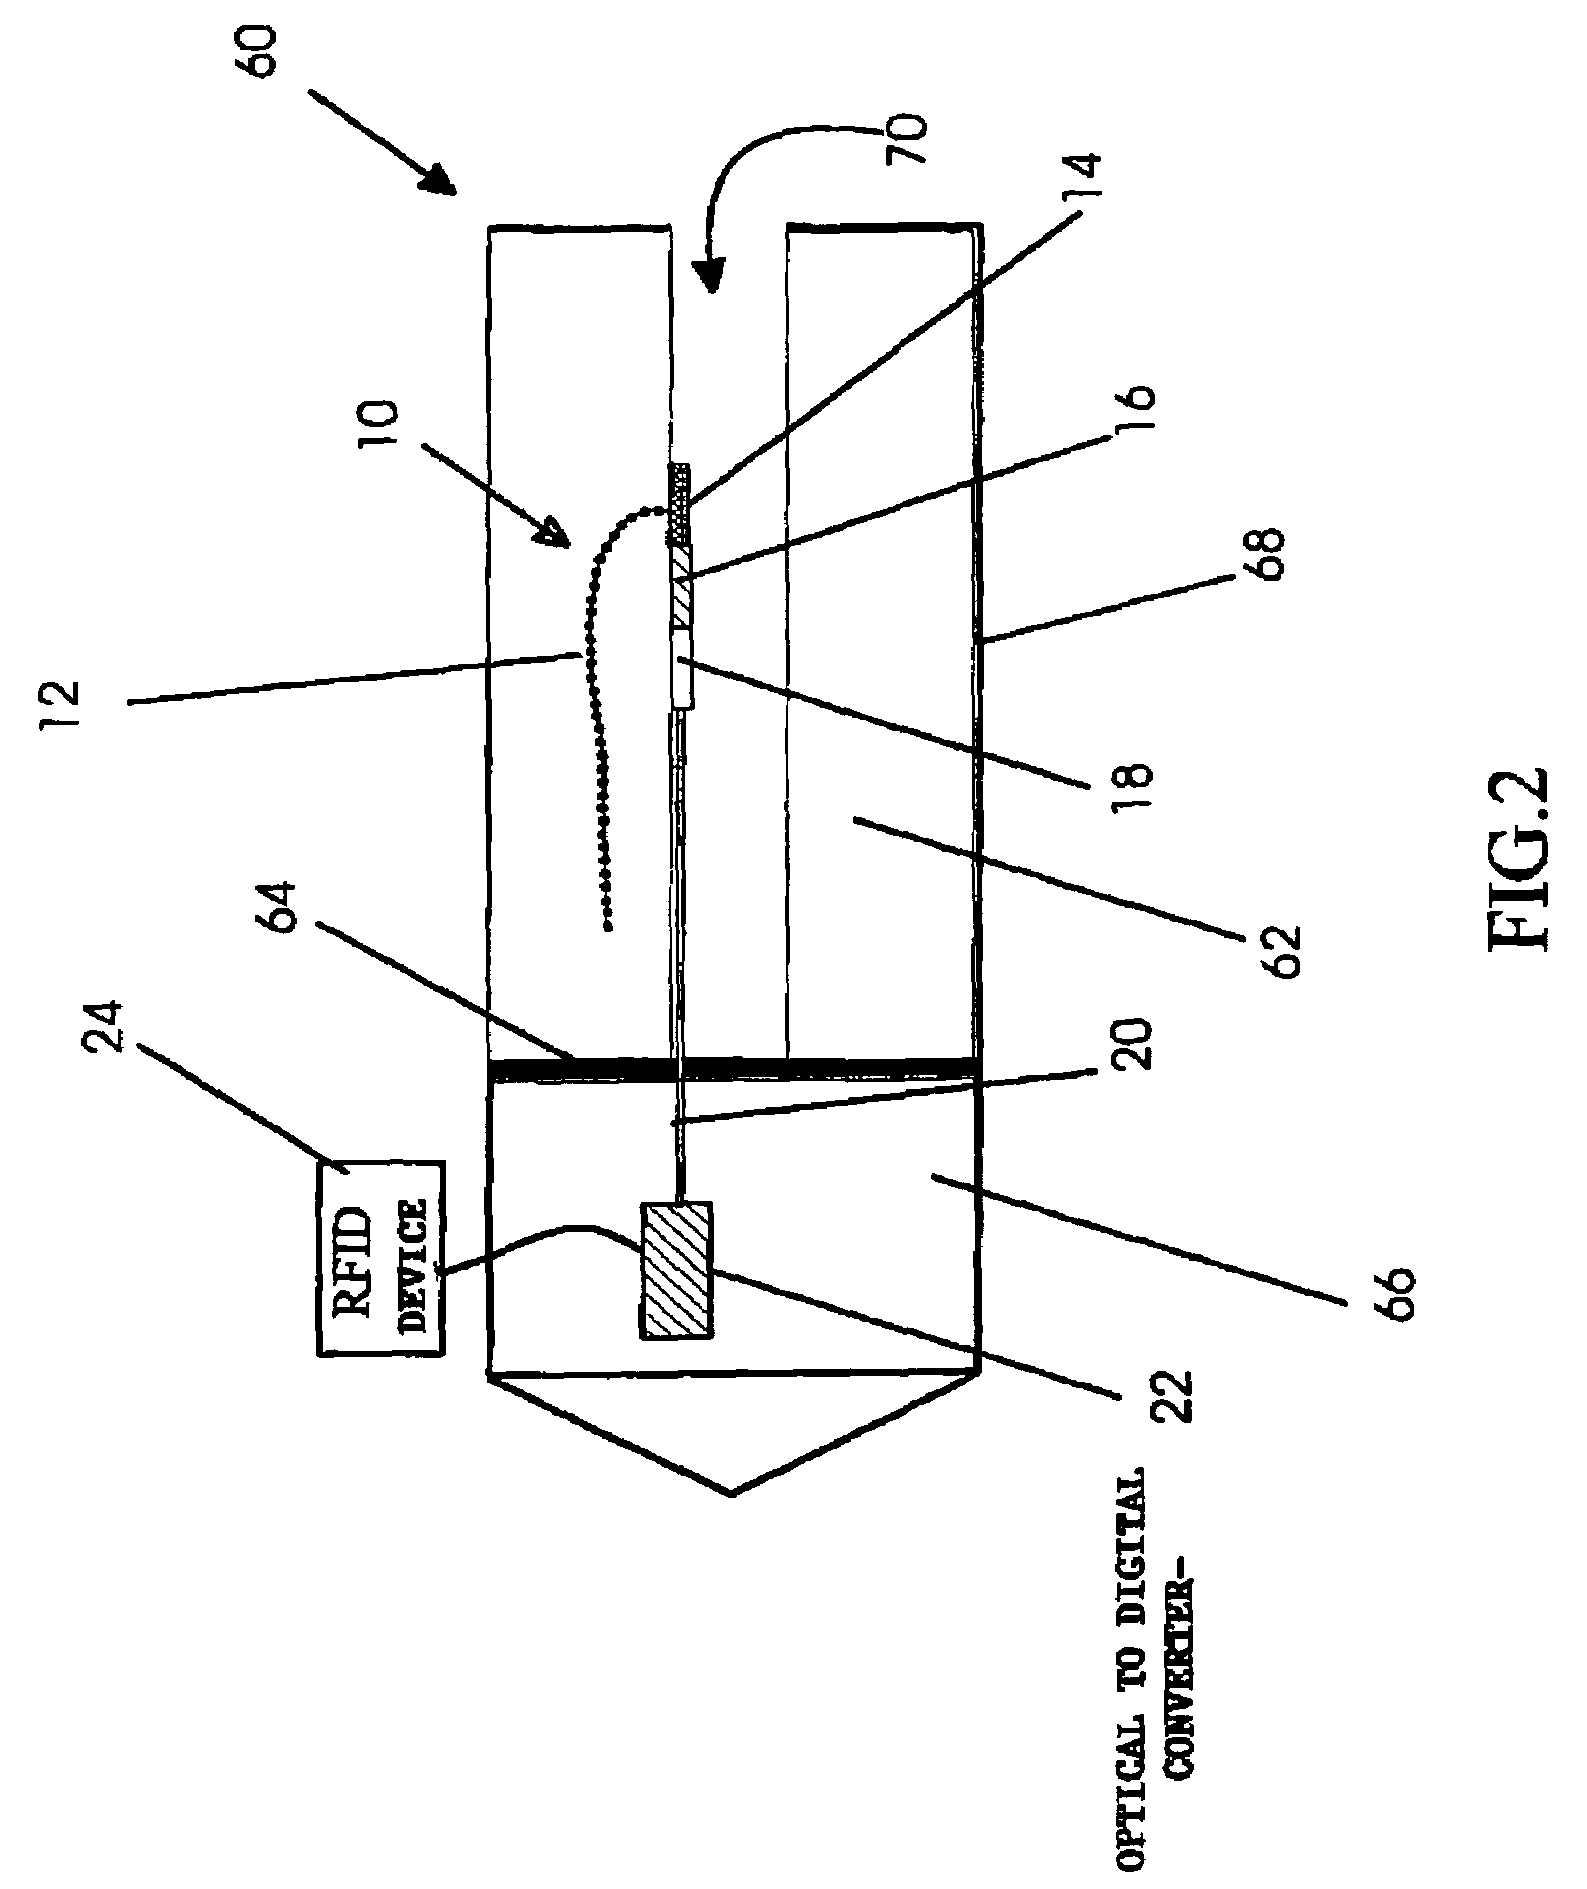 Method for measuring the health of solid rocket propellant using an embedded sensor